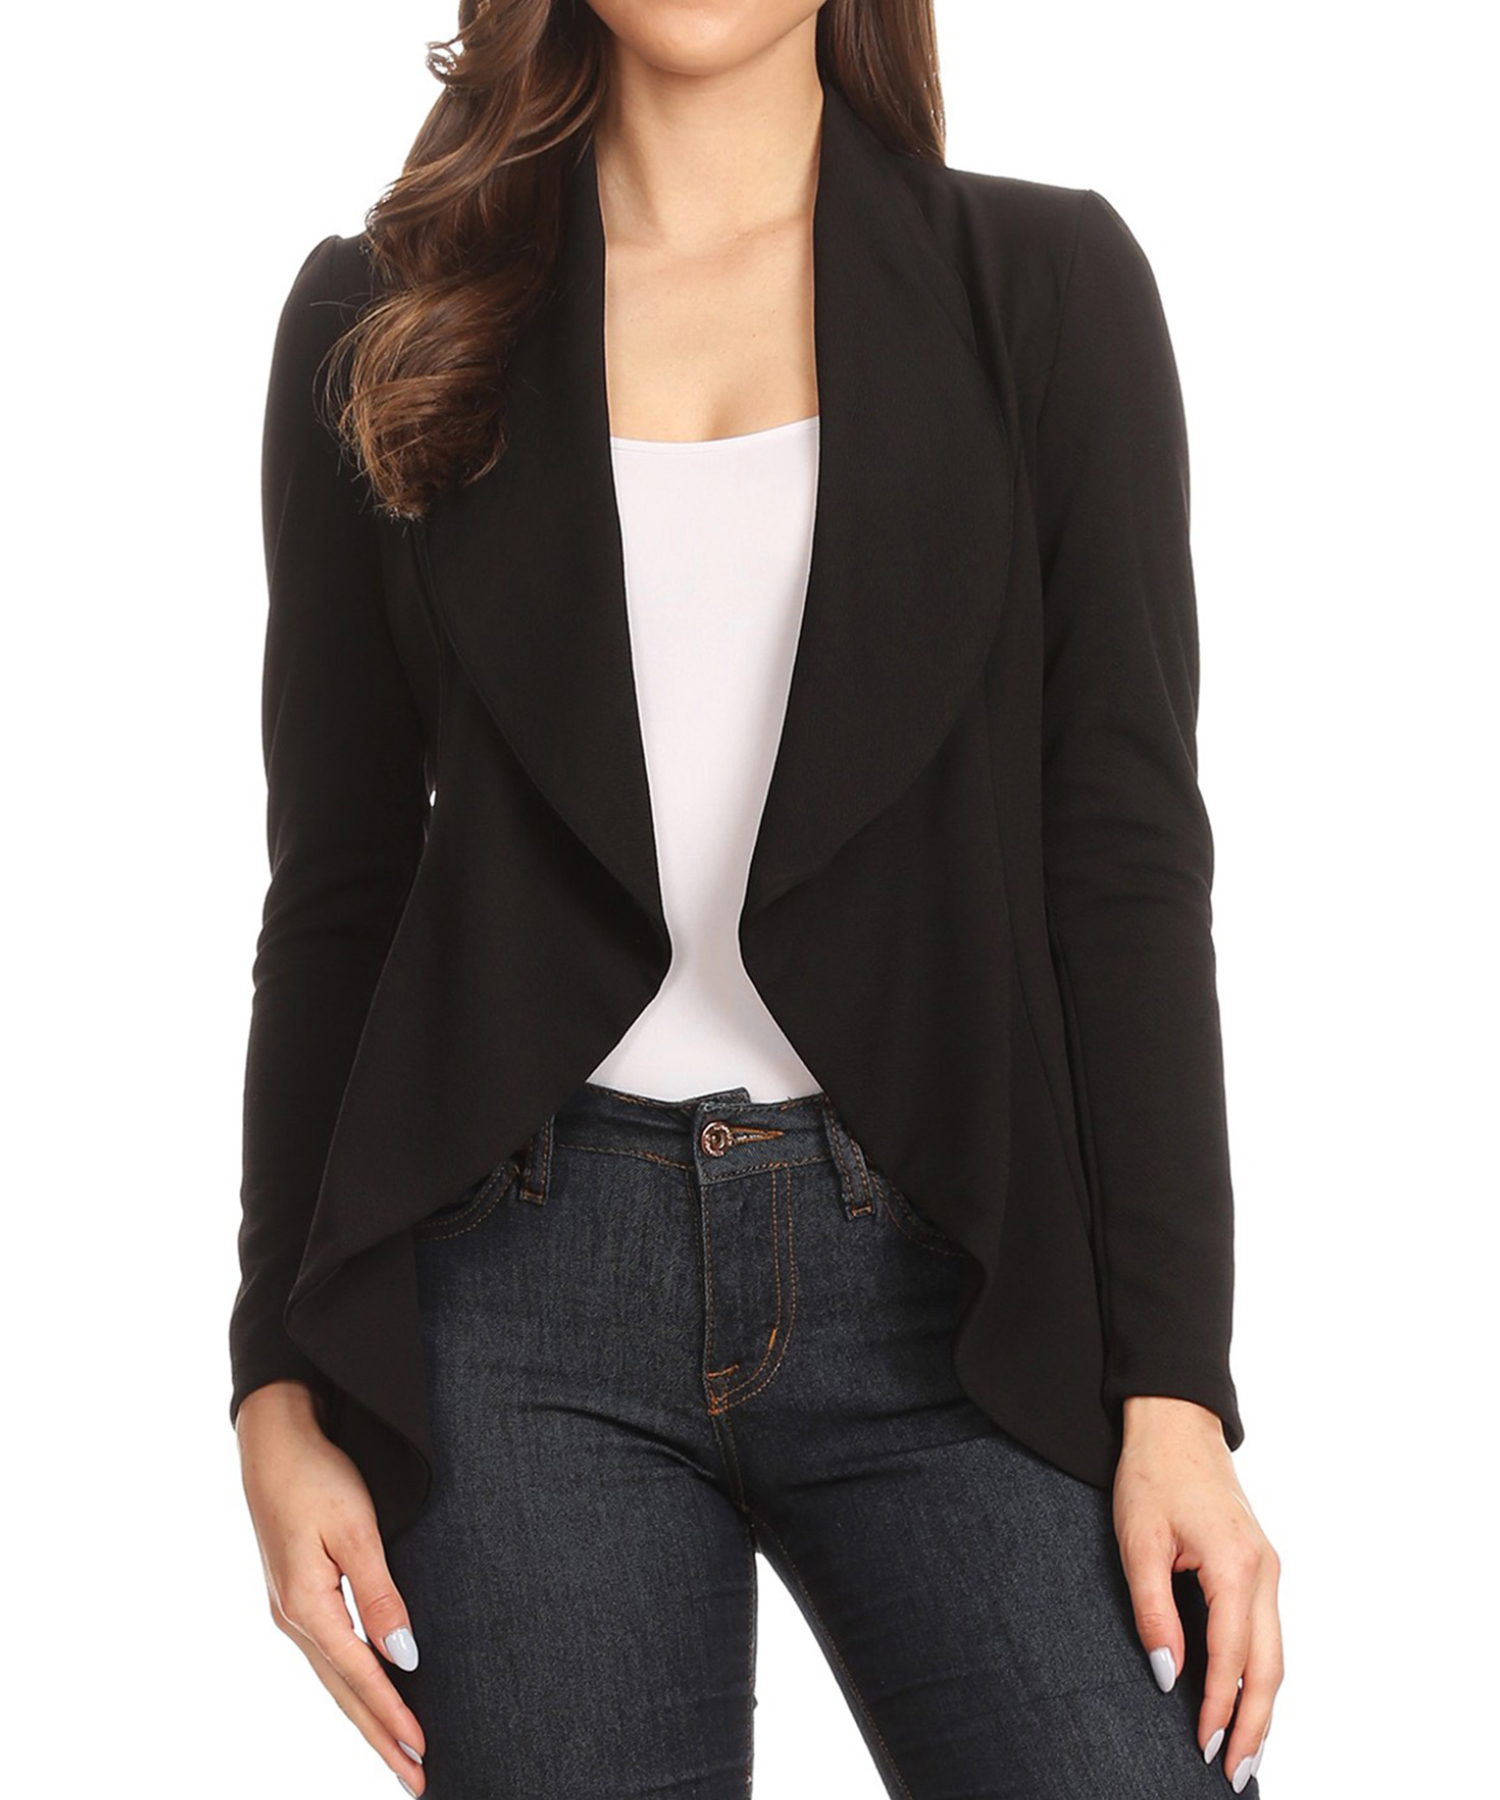 Moa Collection Women's Solid Long Sleeve Waist Length Open Front Office Blazer Pack of 2